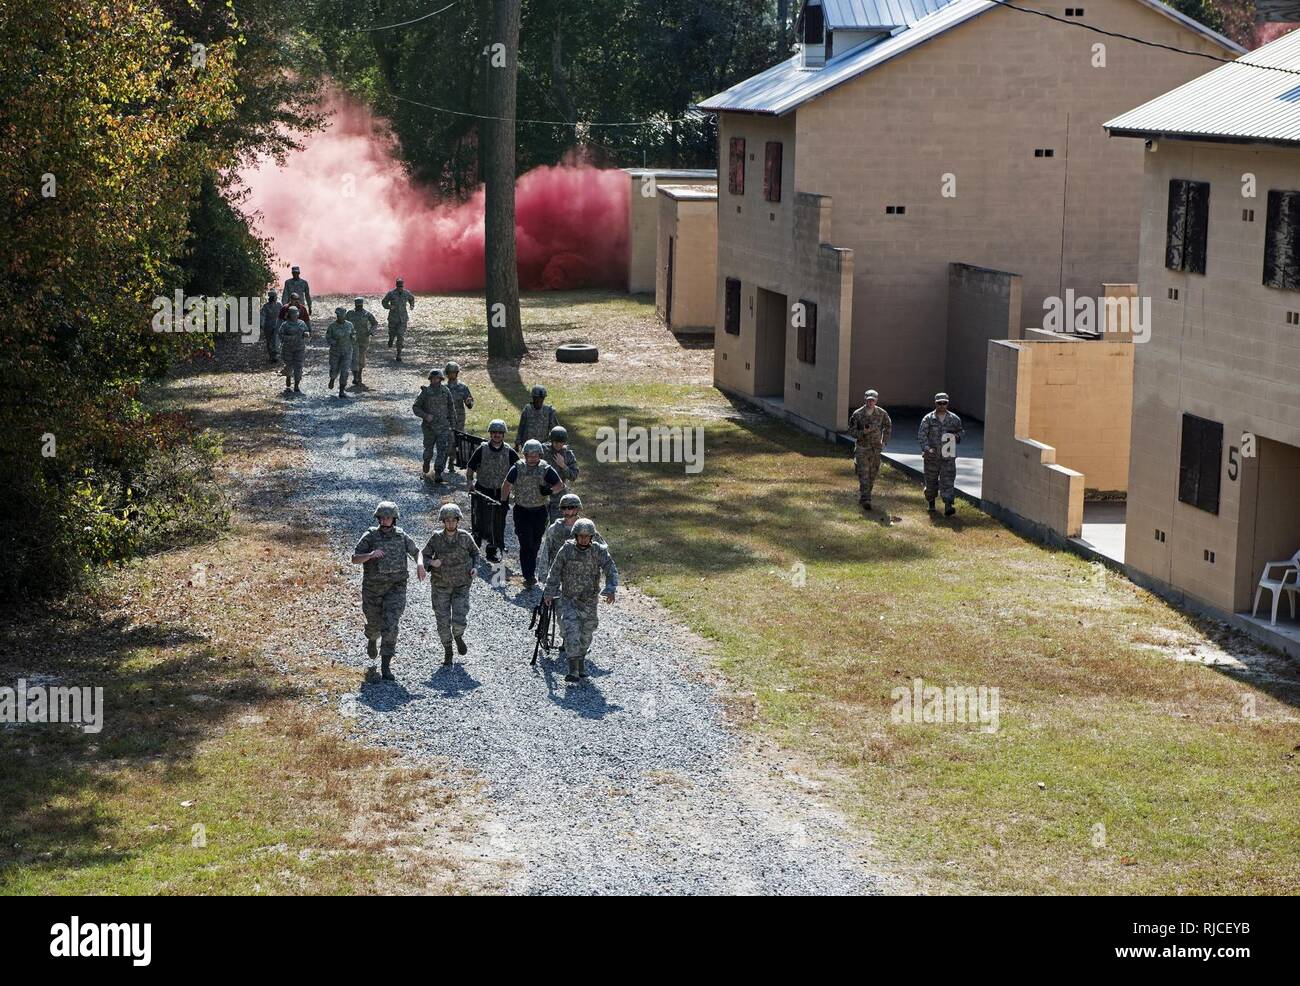 A team of medics respond to a simulated attack during an Emergency Medical Technician refresher course, Nov. 4, 2016, at Moody Air Force Base, Ga. The medics utilized the Military Operations in Urban Terrain village where they were tested on skills they’d spent the week refreshing. Stock Photo